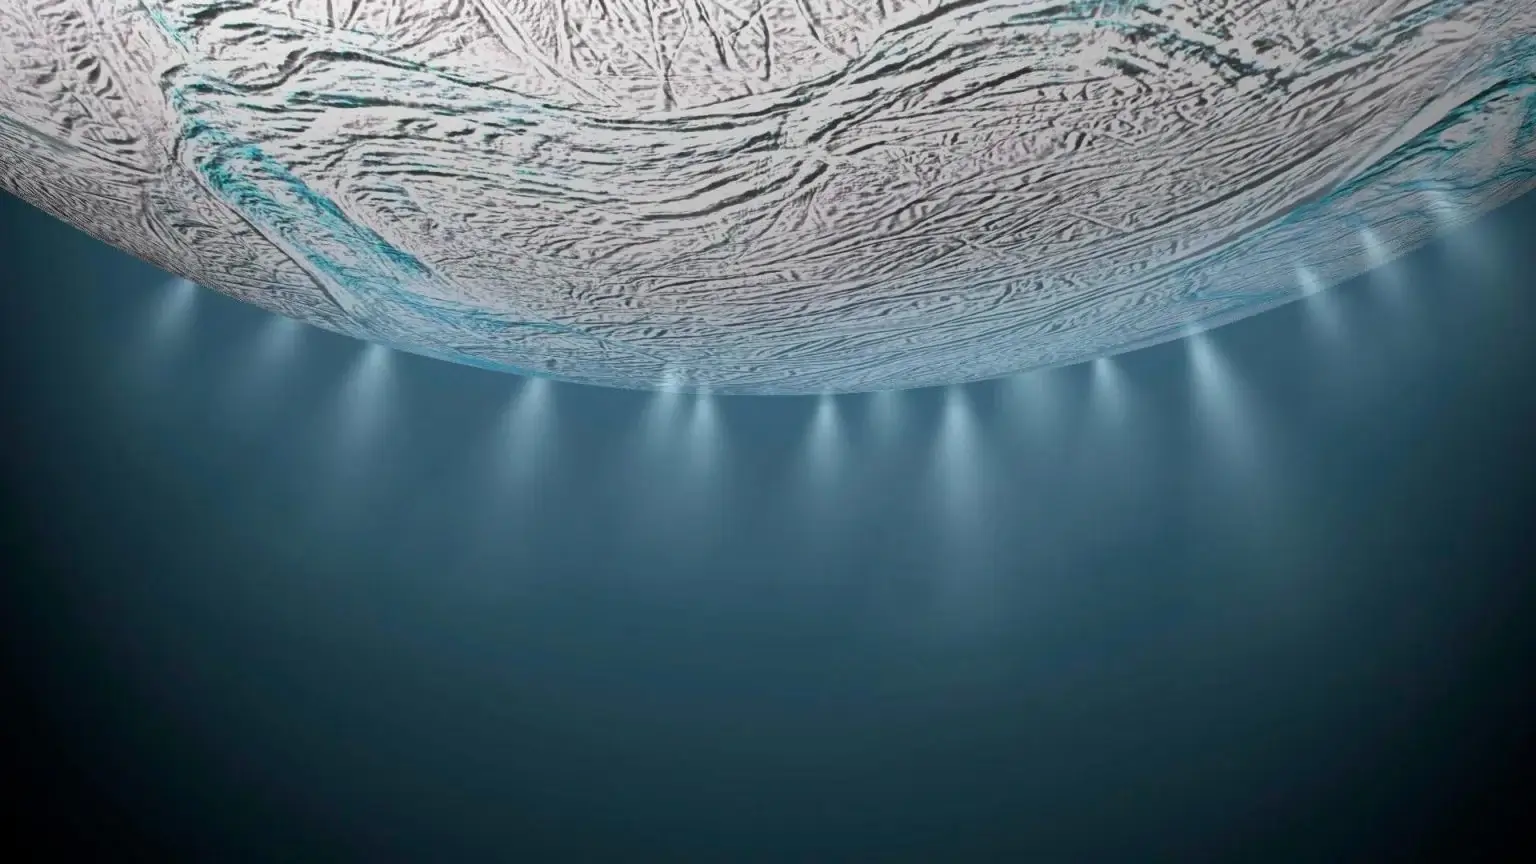 This illustration shows Saturn's icy moon Enceladus with a buildup of ice particles, water vapor, and organic molecules ejected from cracks in the moon's south polar region. Credit: NASA/JPL-Caltech